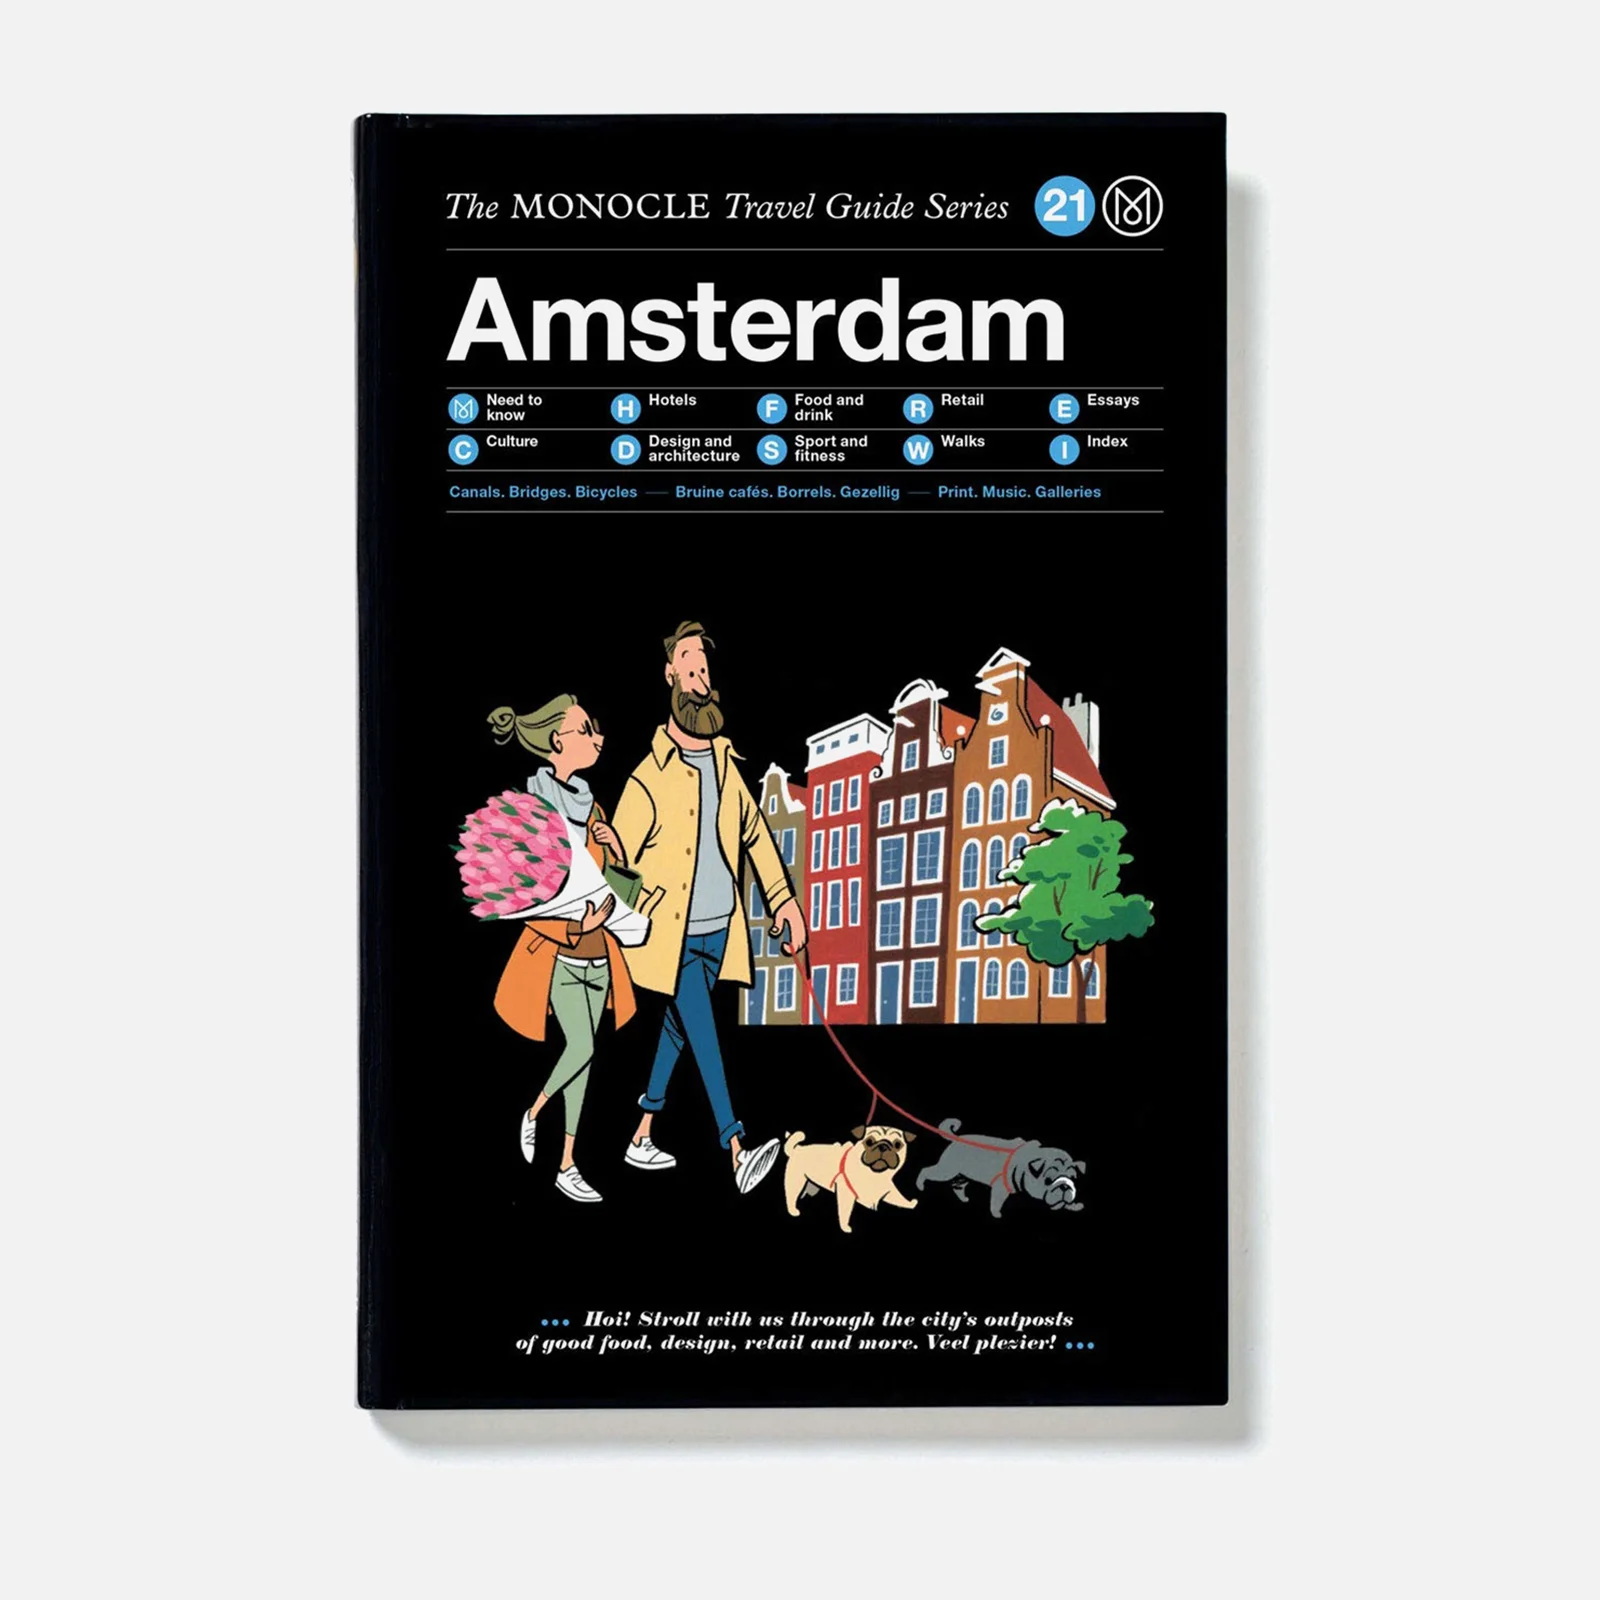 Monocle: Travel Guide Series - Amsterdam Image 1